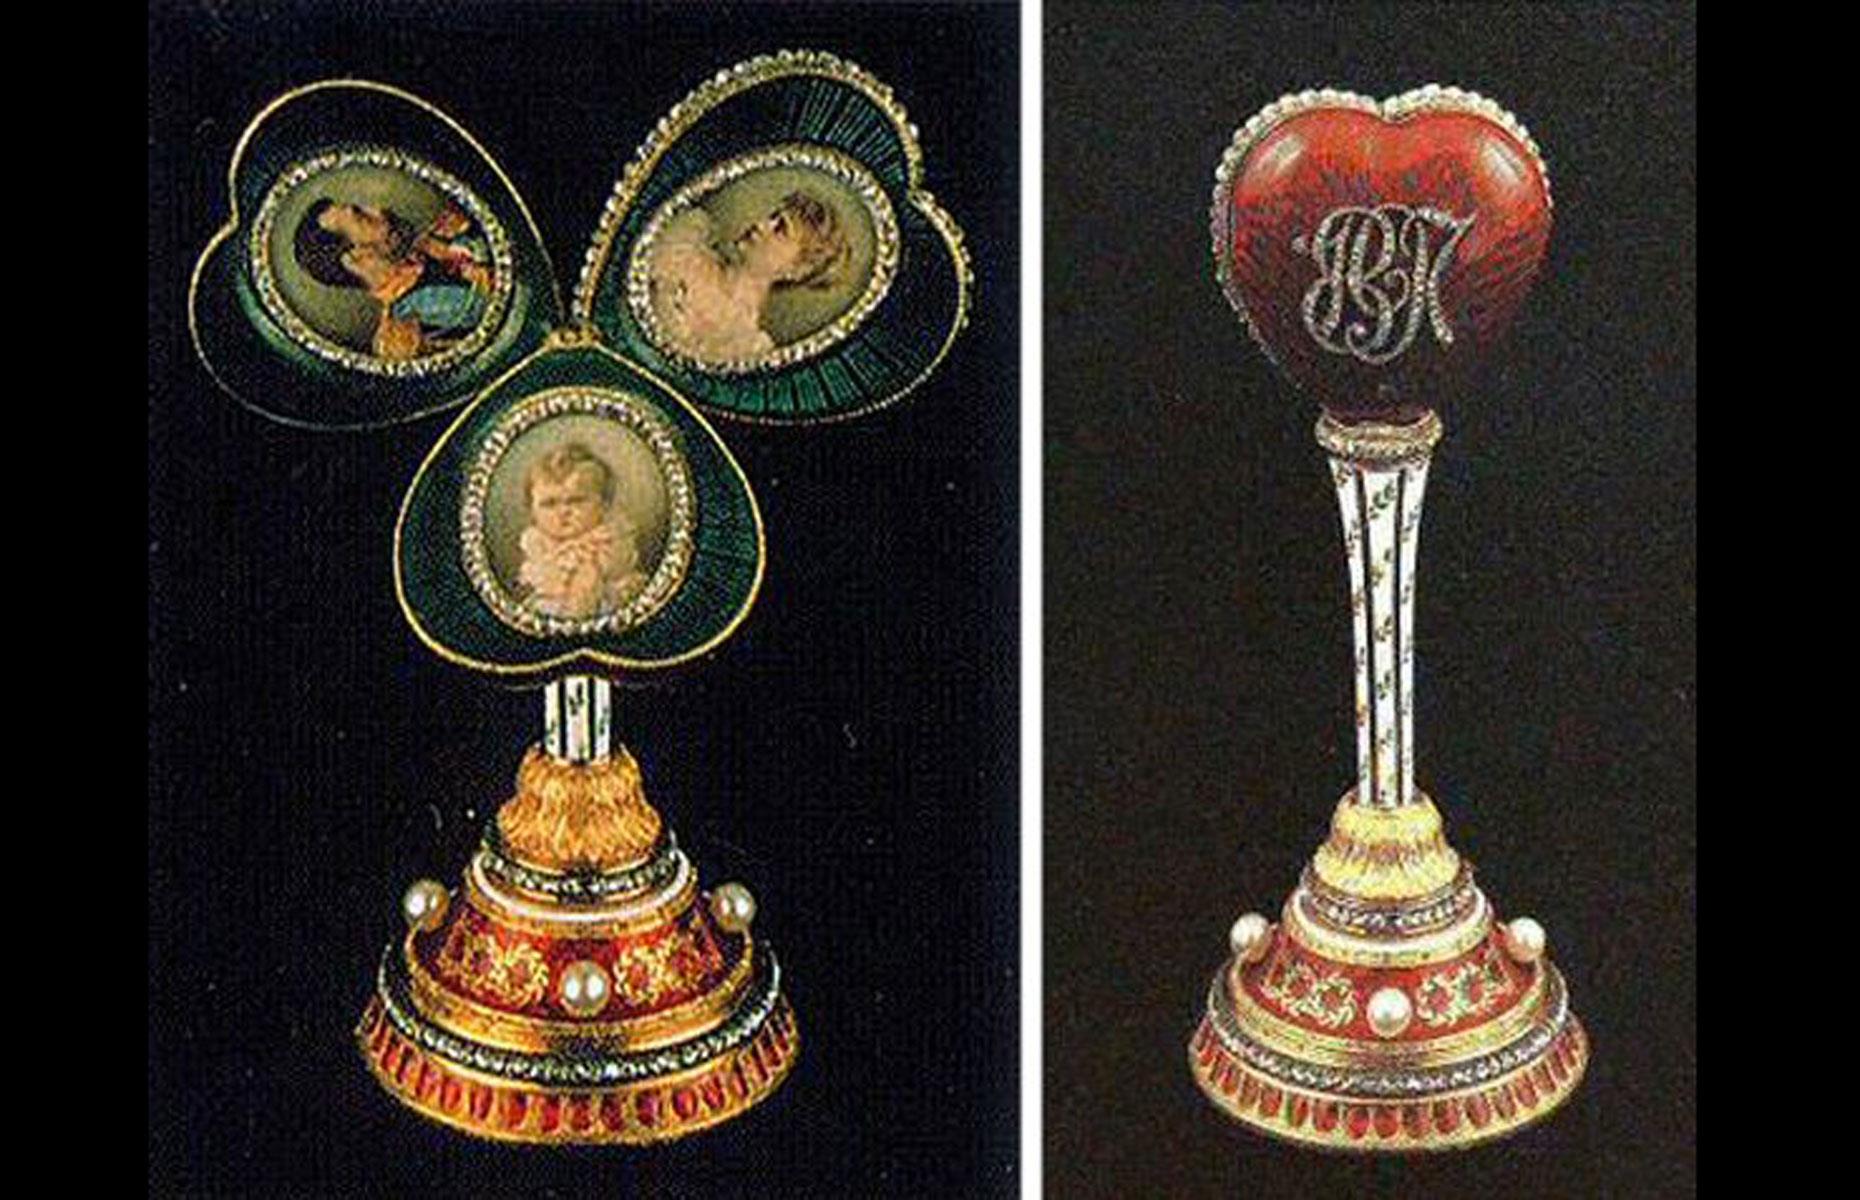 The lost Fabergé Imperial eggs